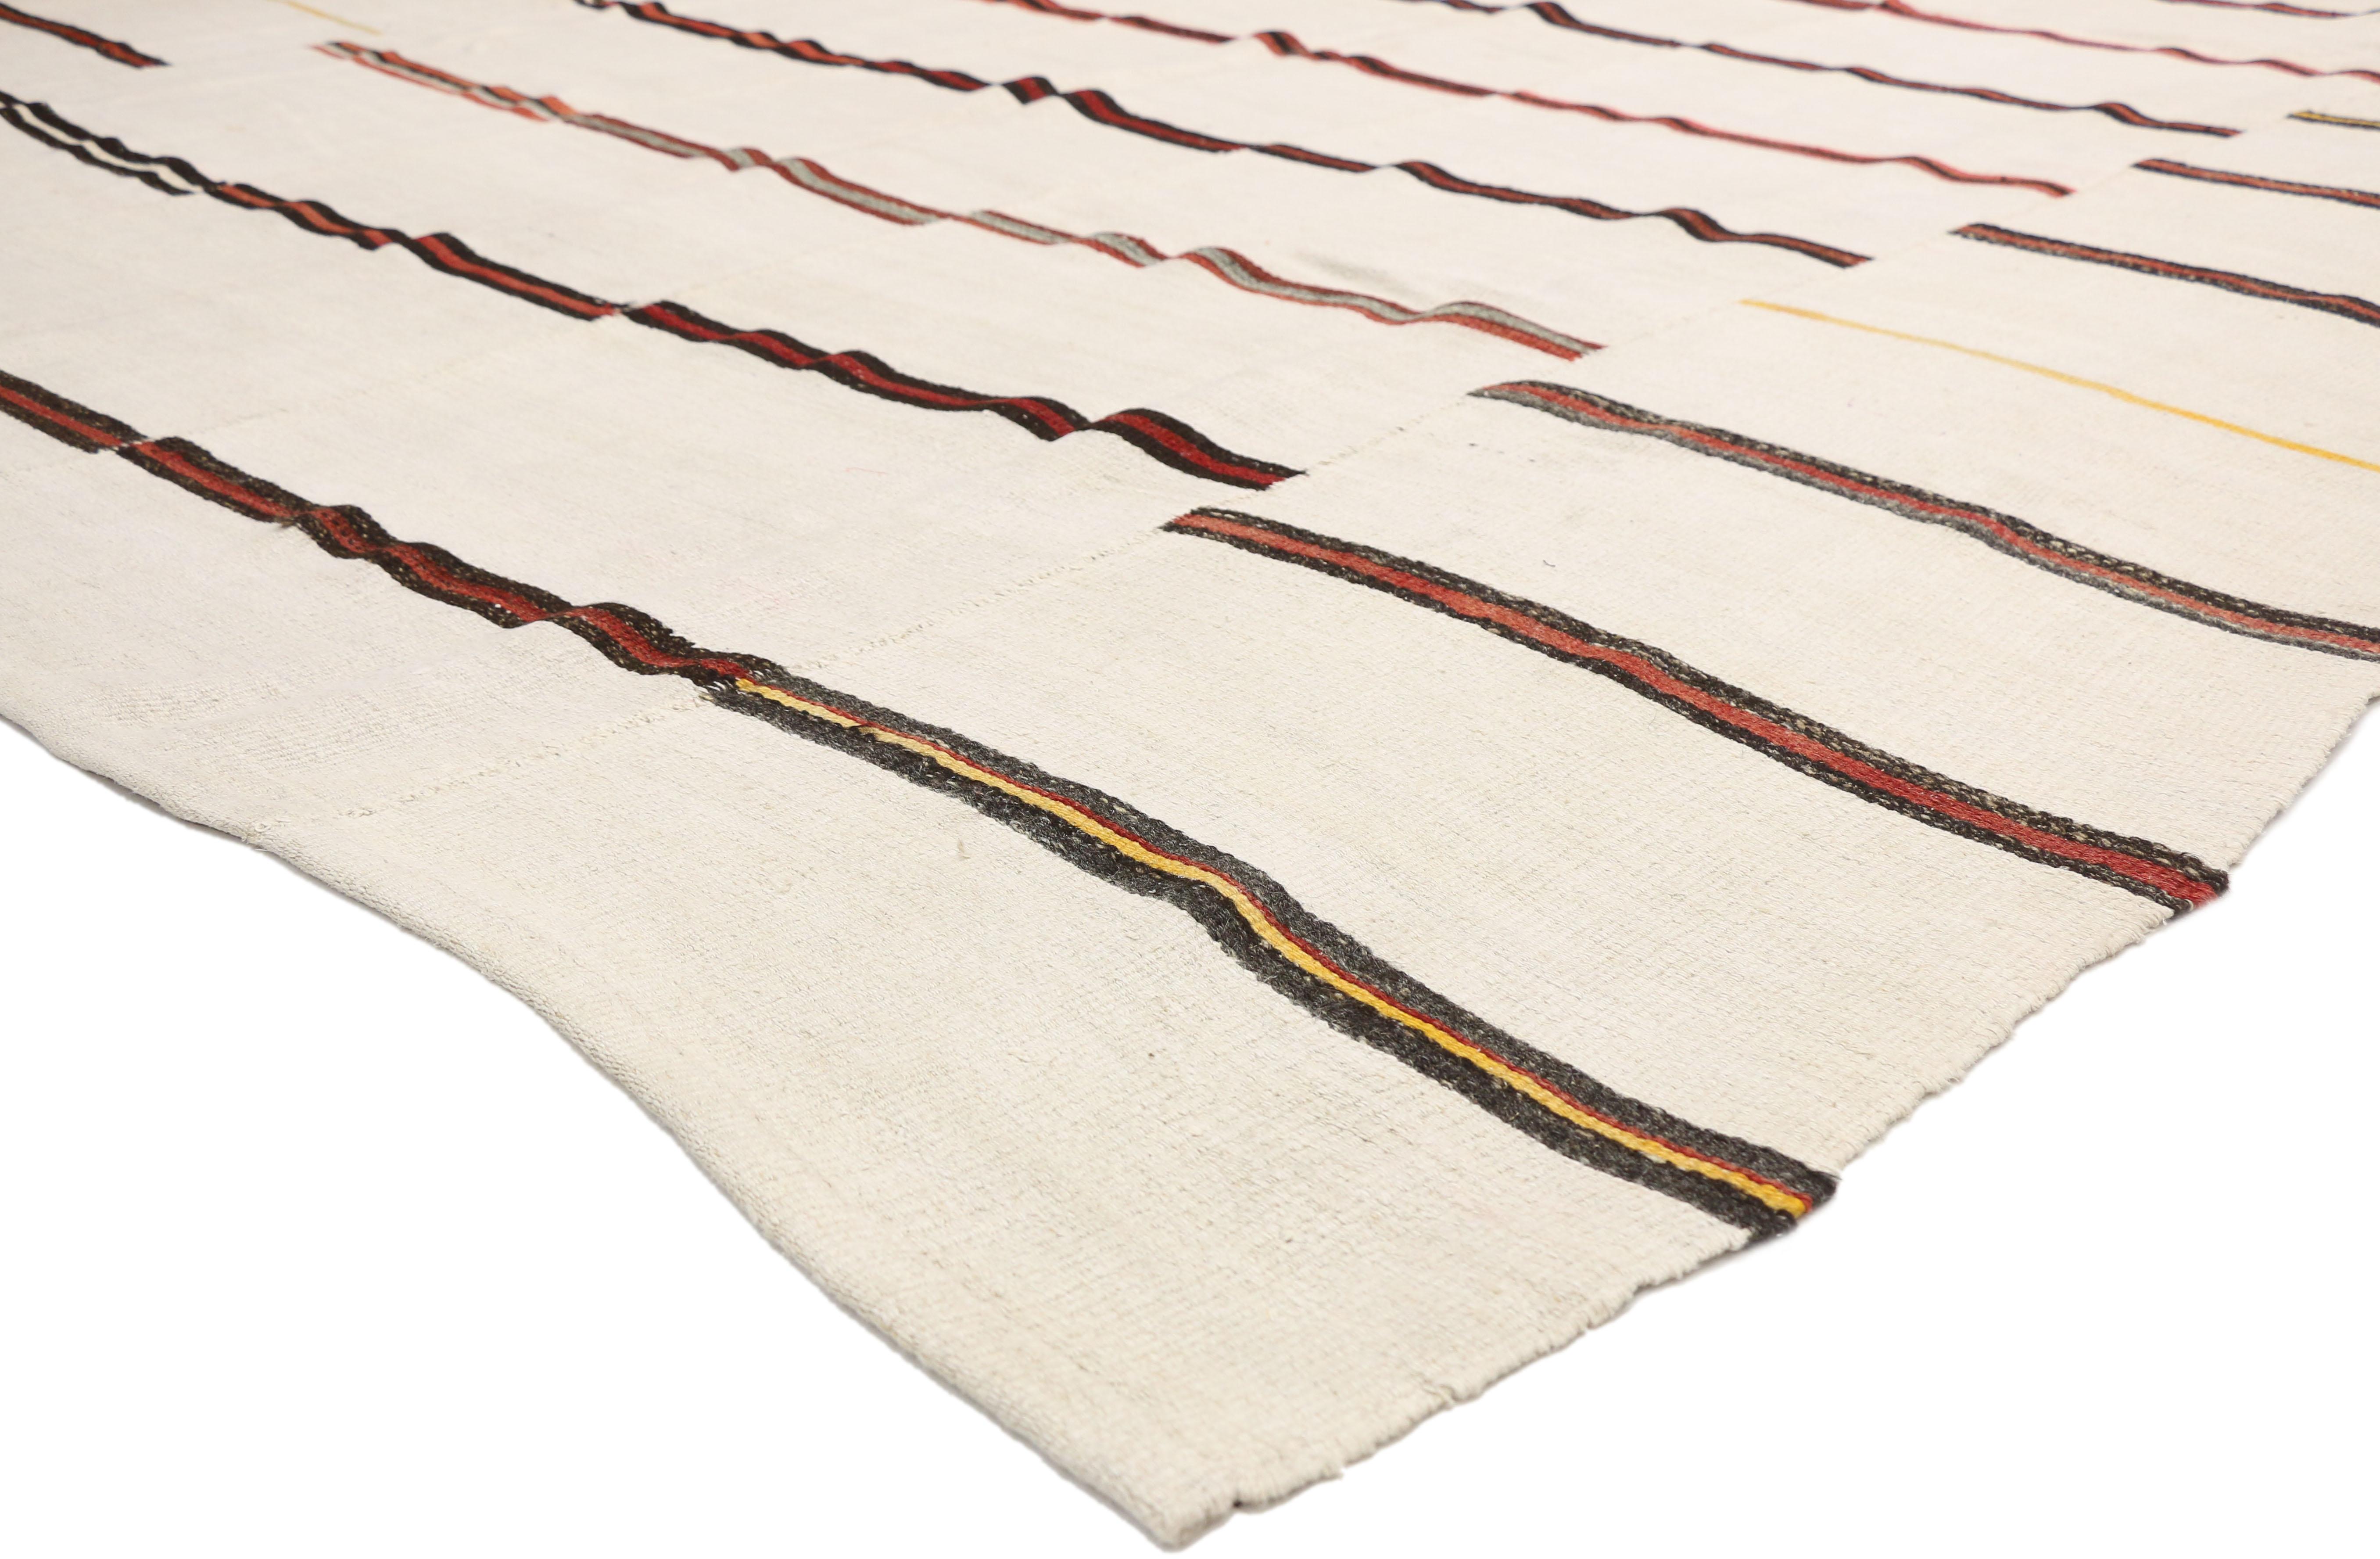 51836, vintage Striped Kilim rug with Modernist style, large flat-weave Area rug. The neutral hues and clean sophistication in this handwoven wool vintage Turkish Kilim area rug beautifully embodies Organic Modern style. It features a series of